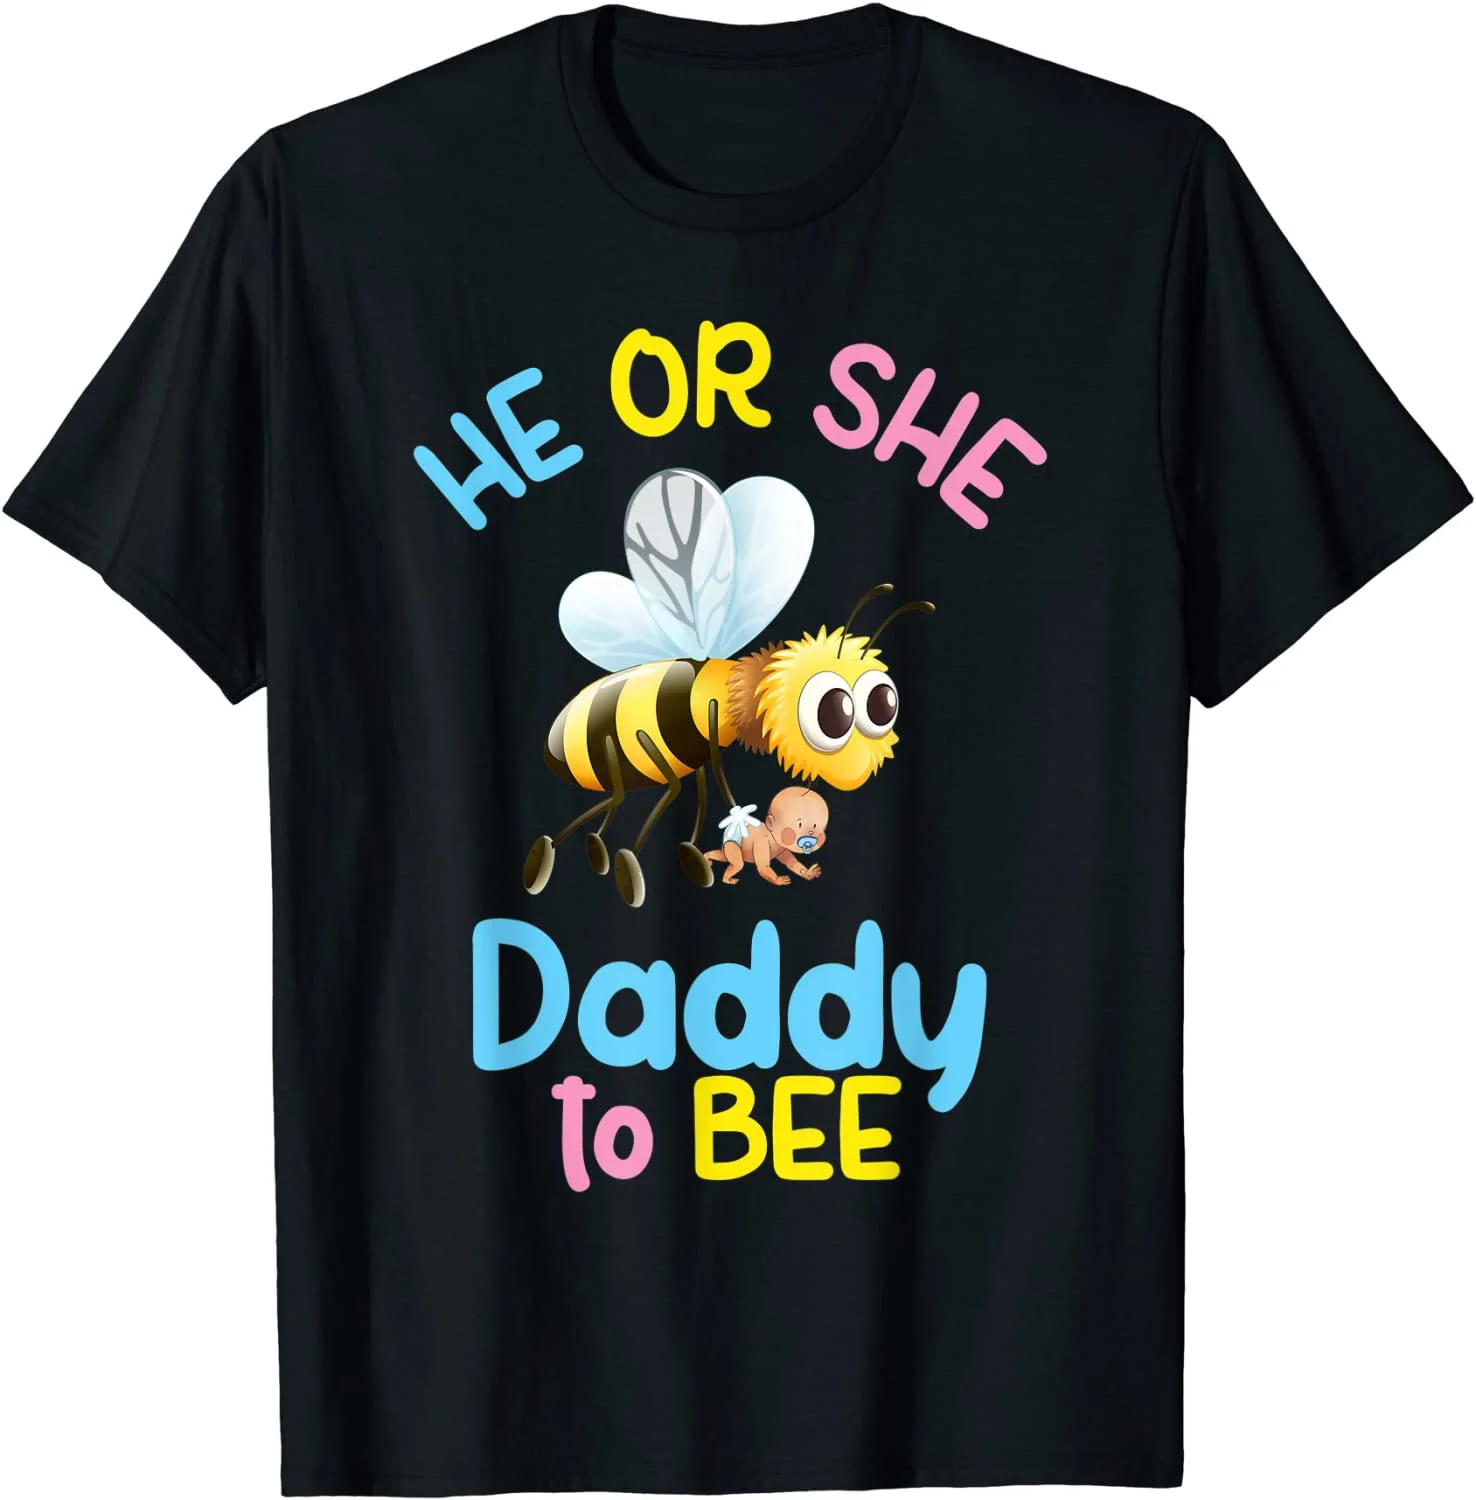 Mens Funny Daddy Gender Reveal - He or She Dad to BEE T-Shirt